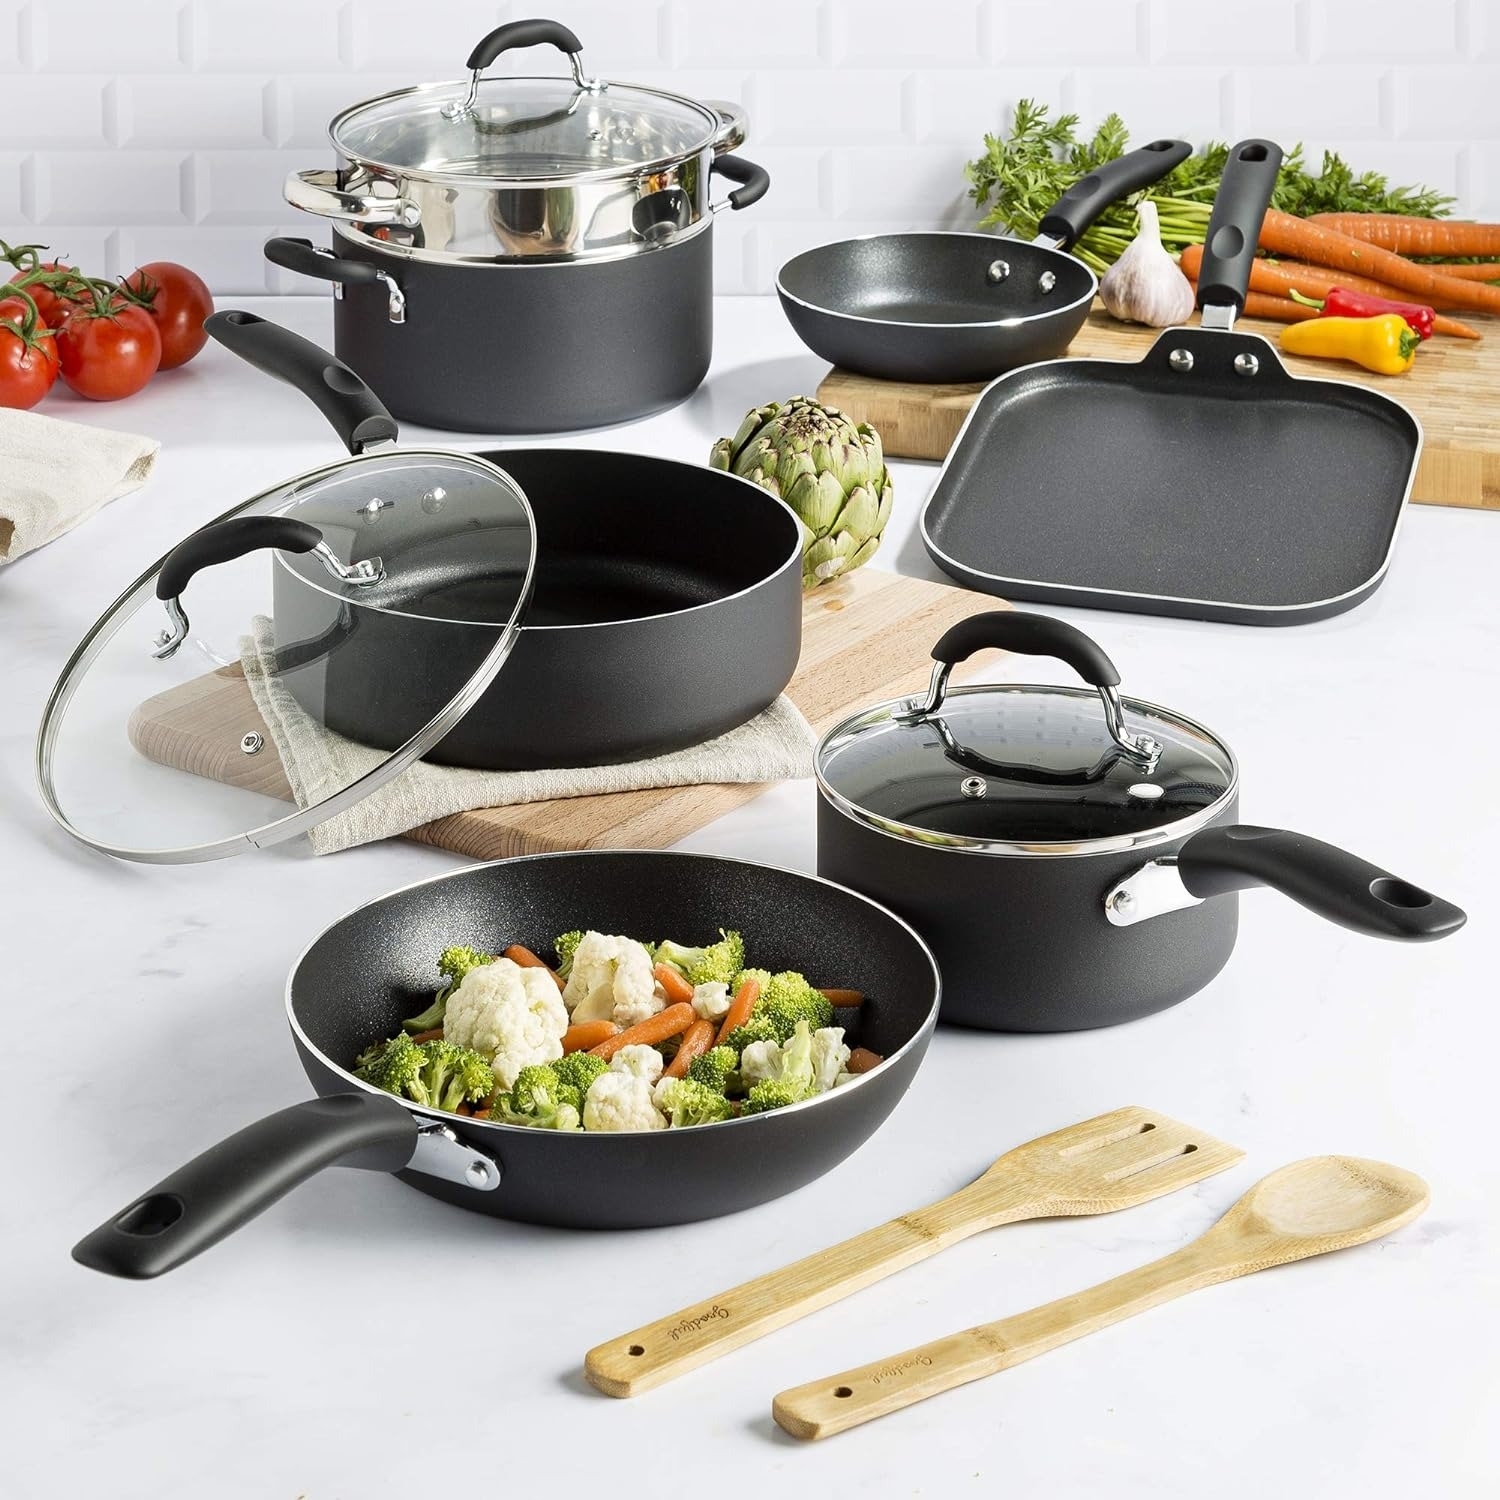 the 12-piece cookware set with pots, pans, and wood cooking utensils